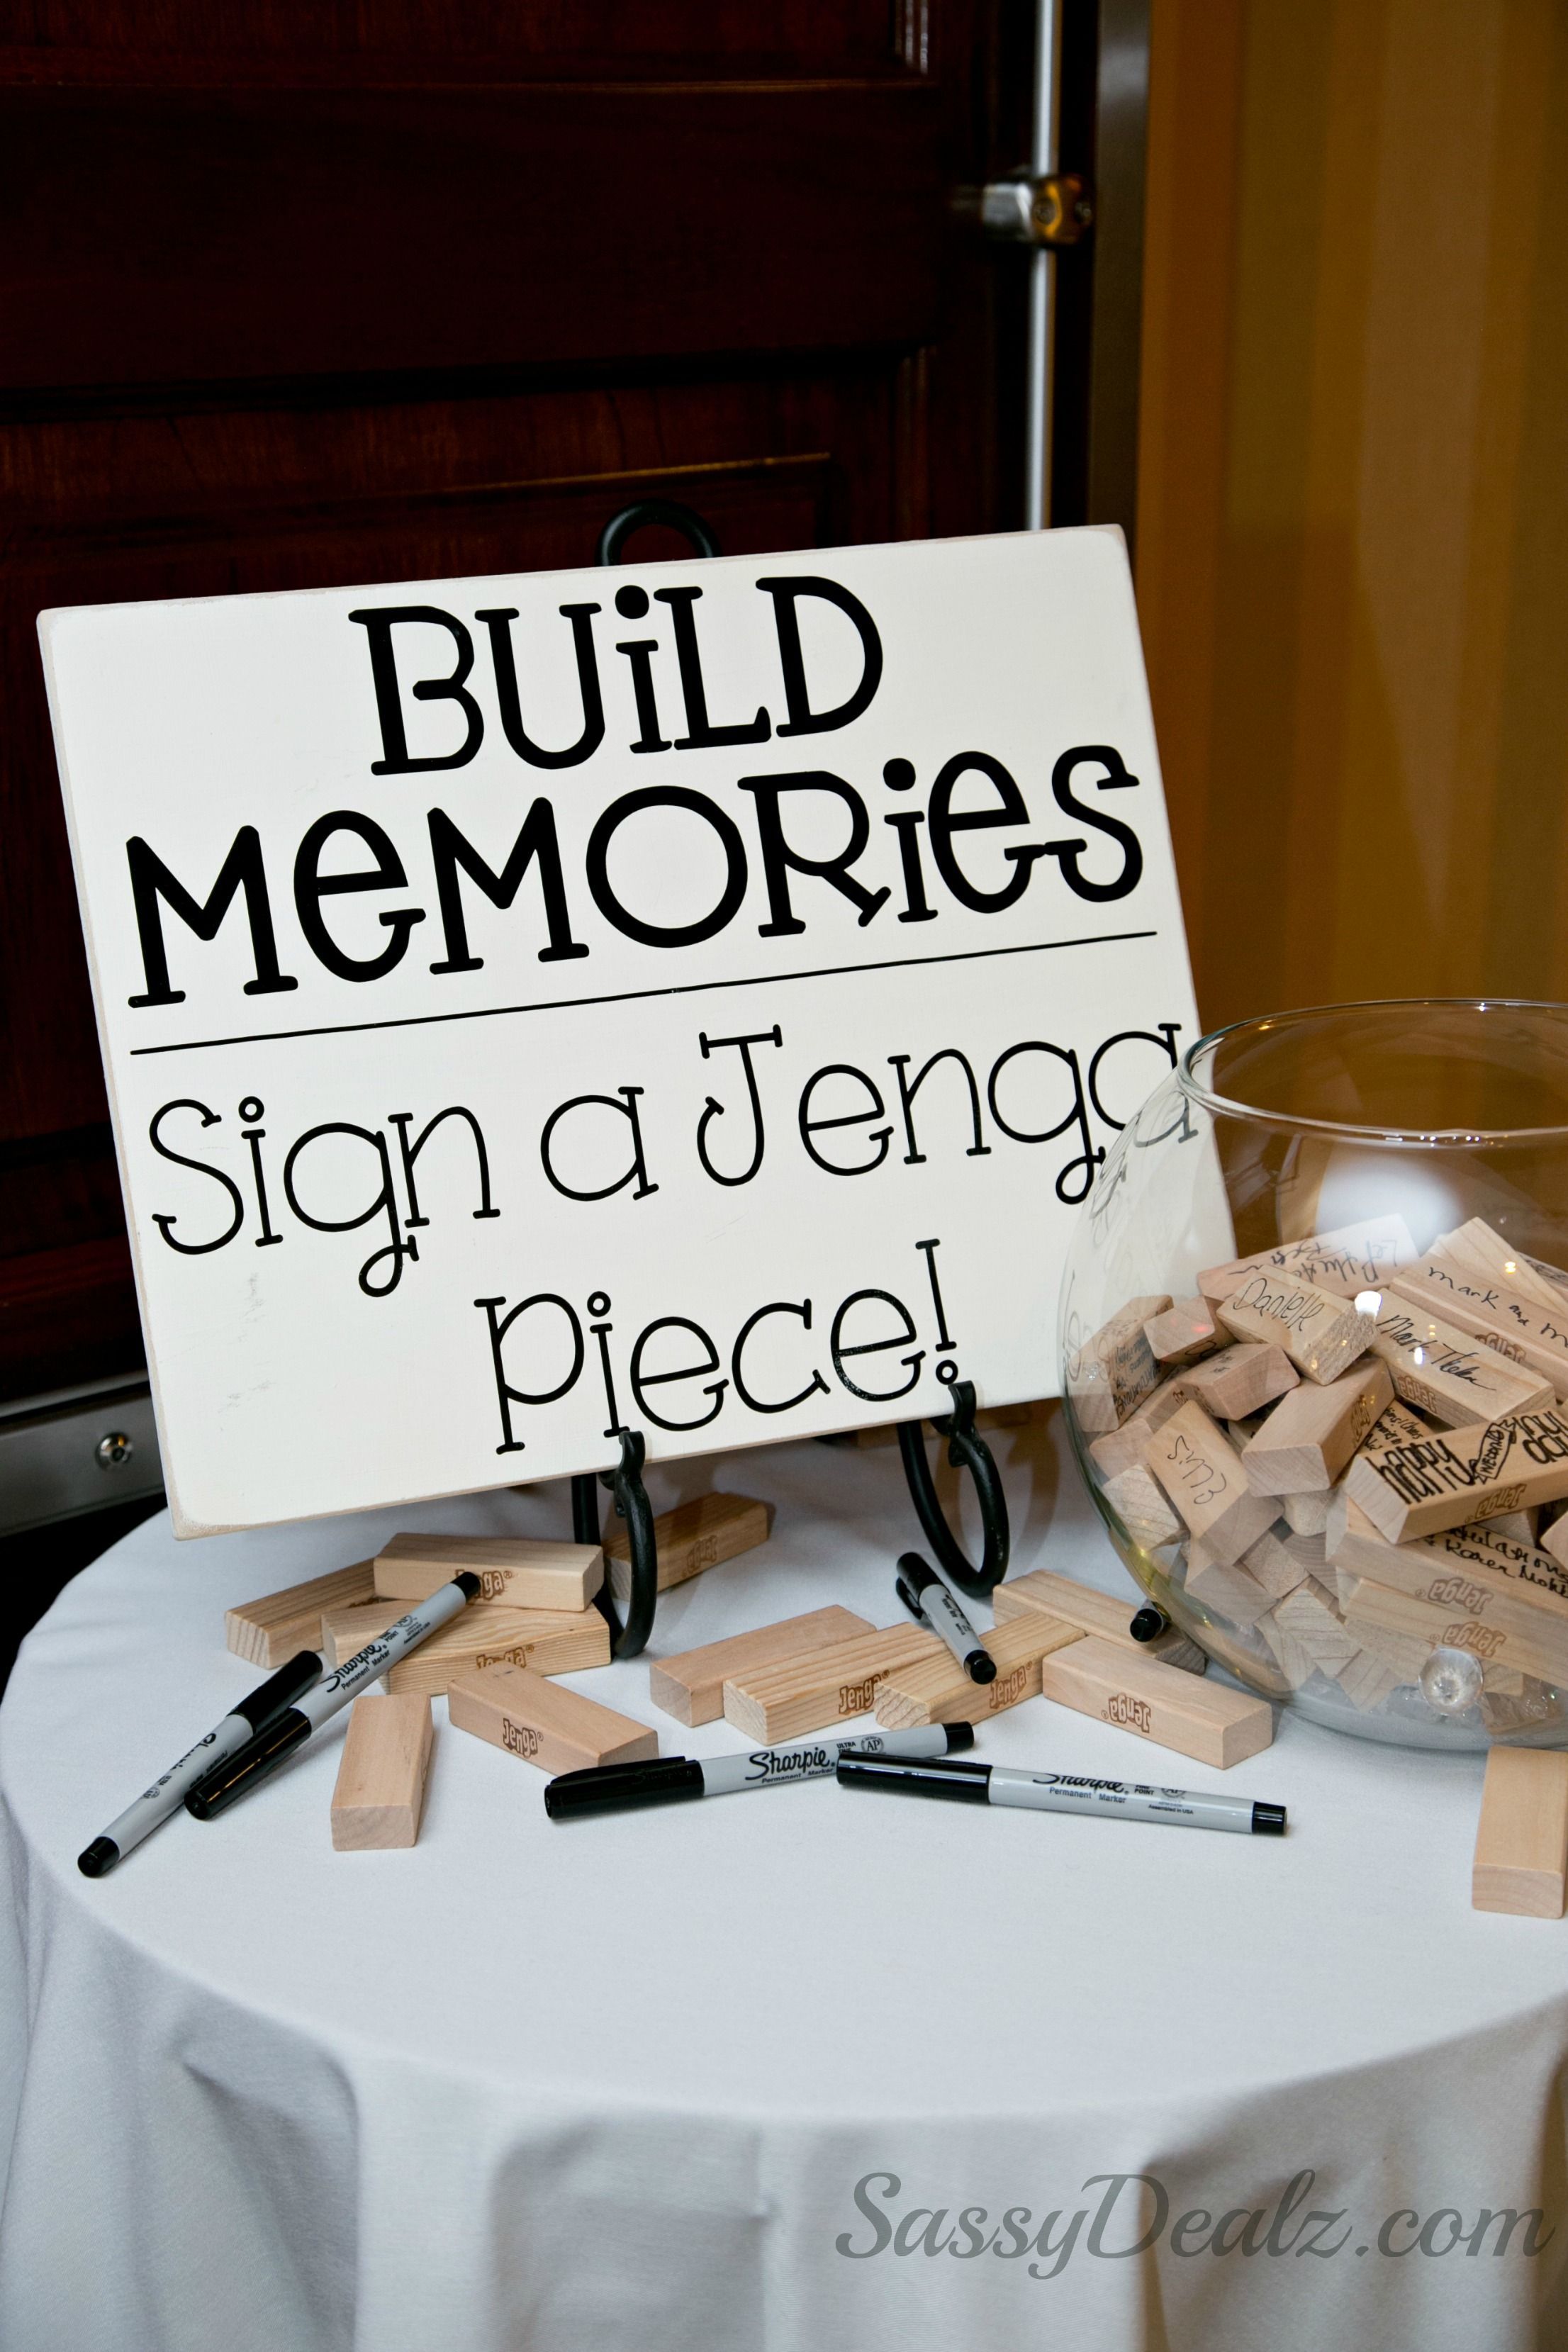 DIY Jenga guestbook wedding idea! The sign “Build memories sign a jenga piece” was made from a wood board with decal letters. Just